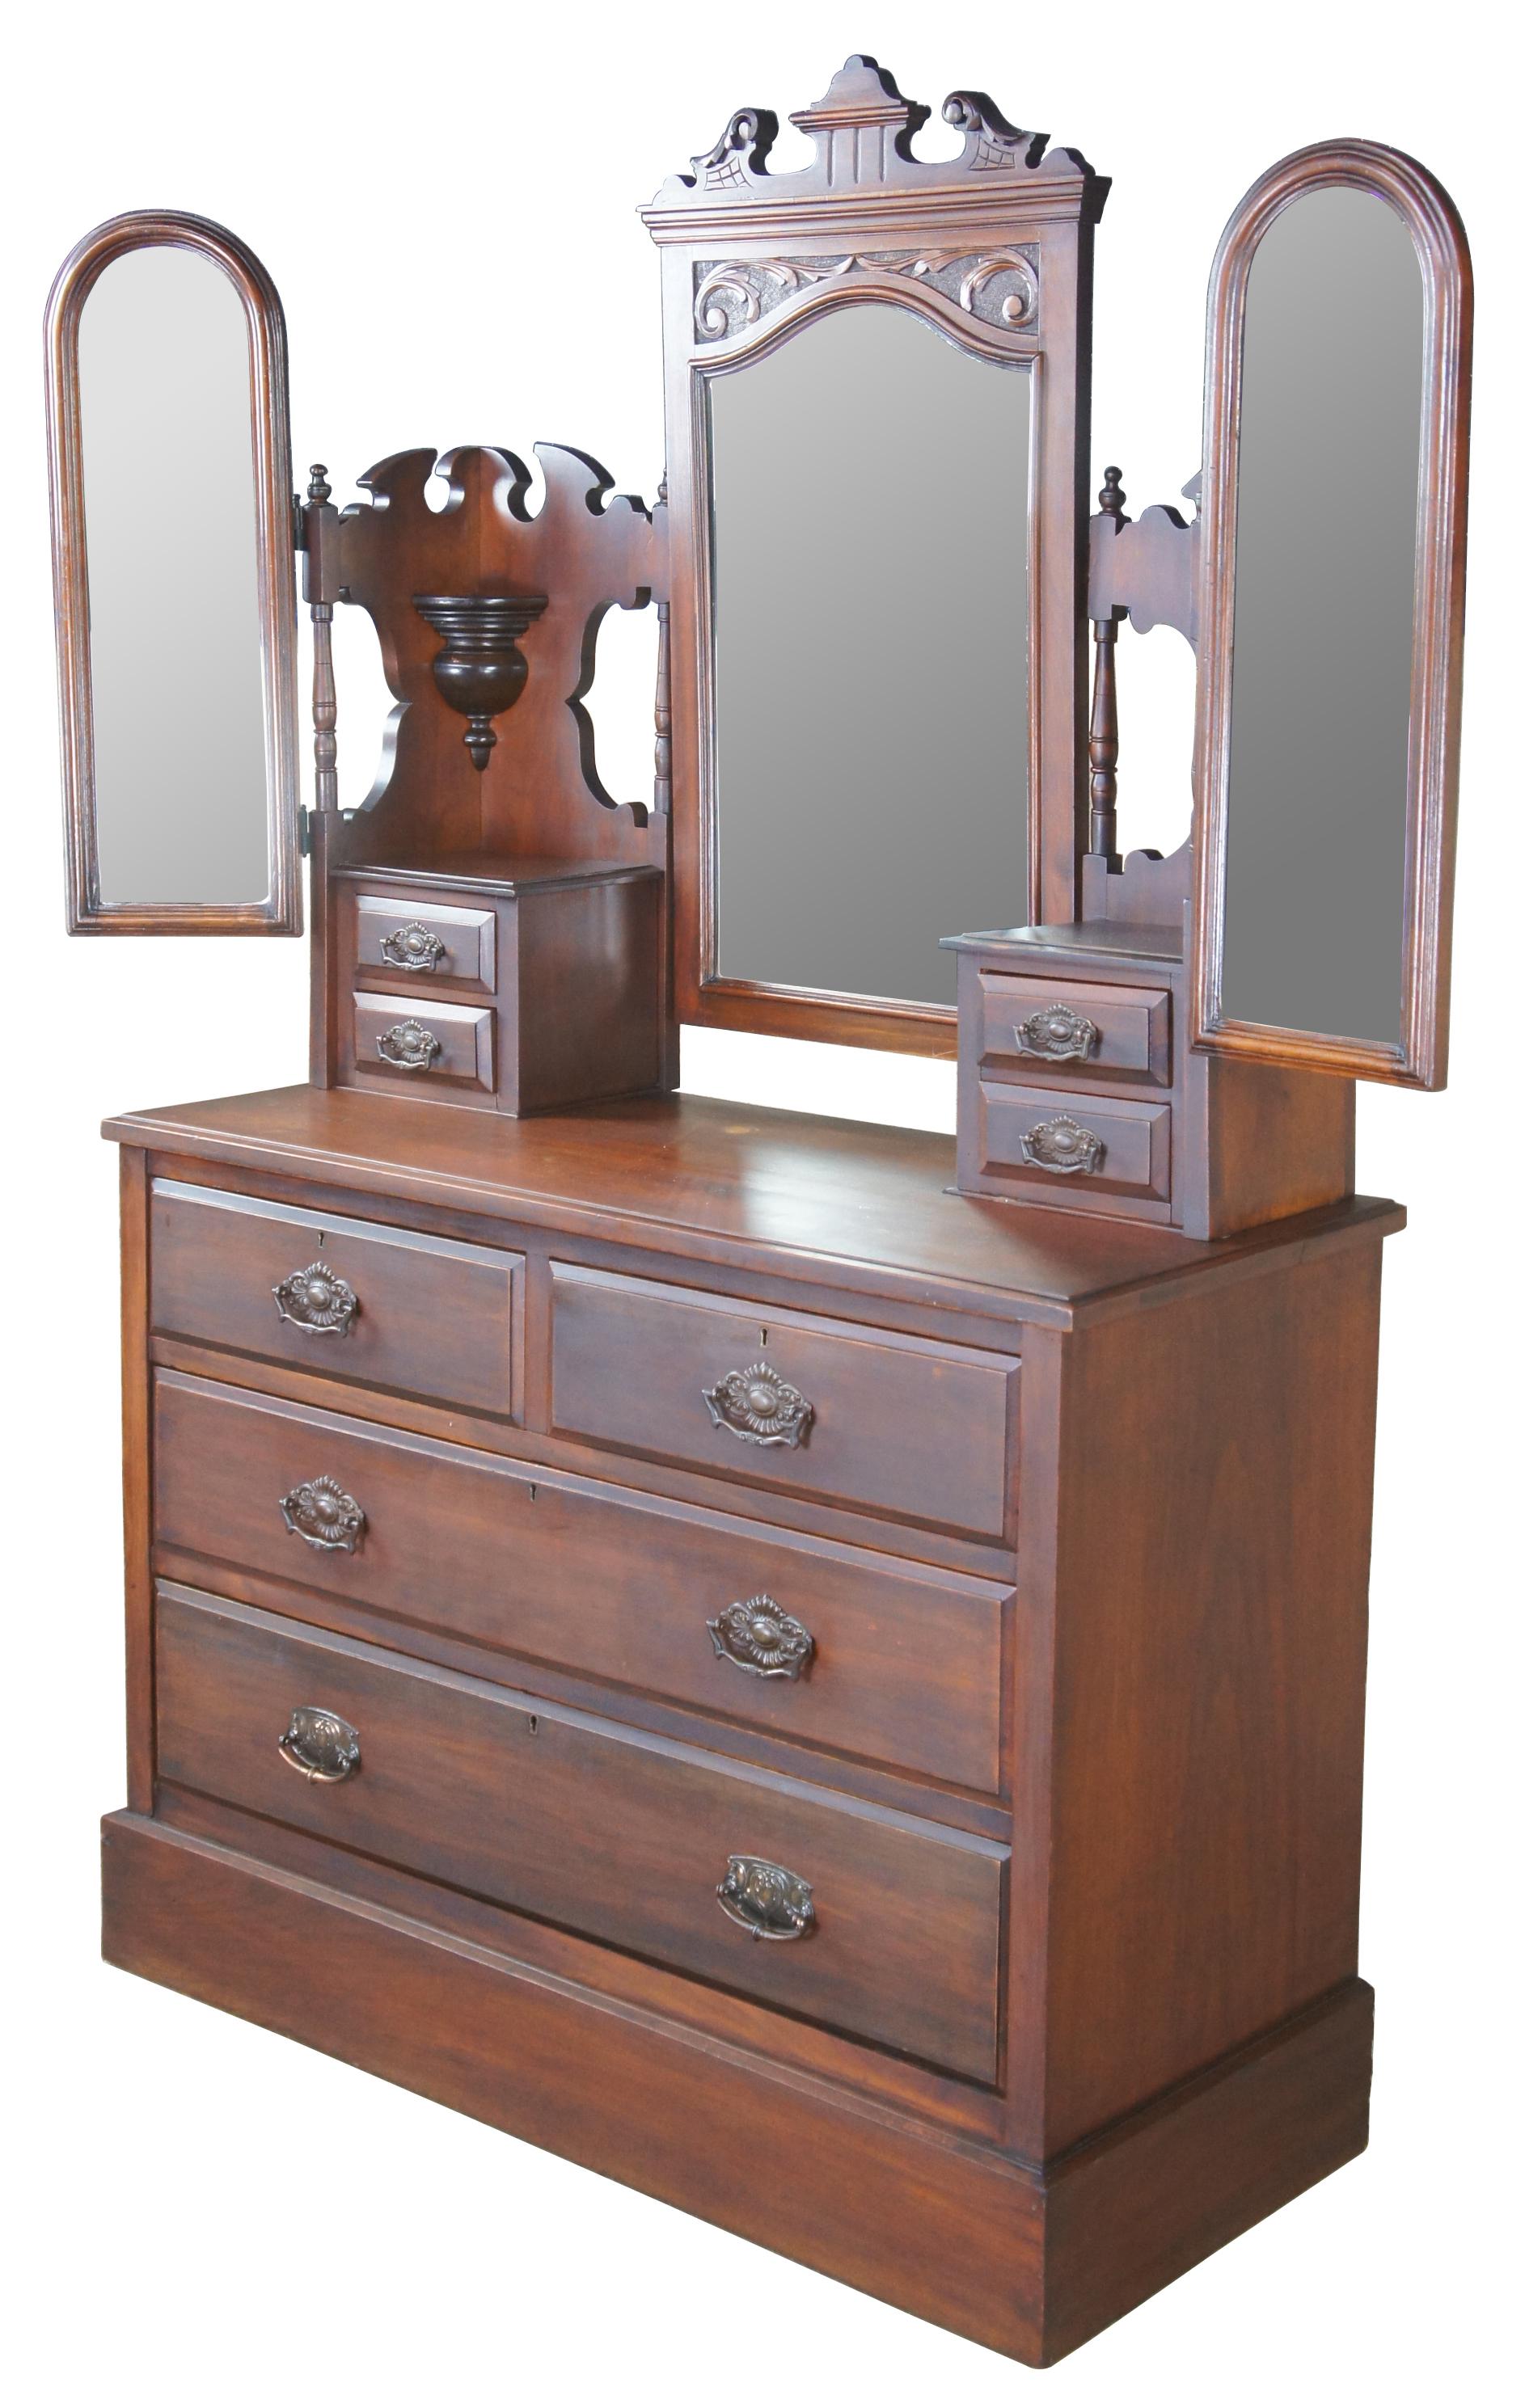 Late 19th century Edwardian English dresser. Made from walnut with three adjustable mirrors. Perfect for shaving and dressing. Includes upper corbels and shelves for display and eight drawers for storage. 

Surface height - 31